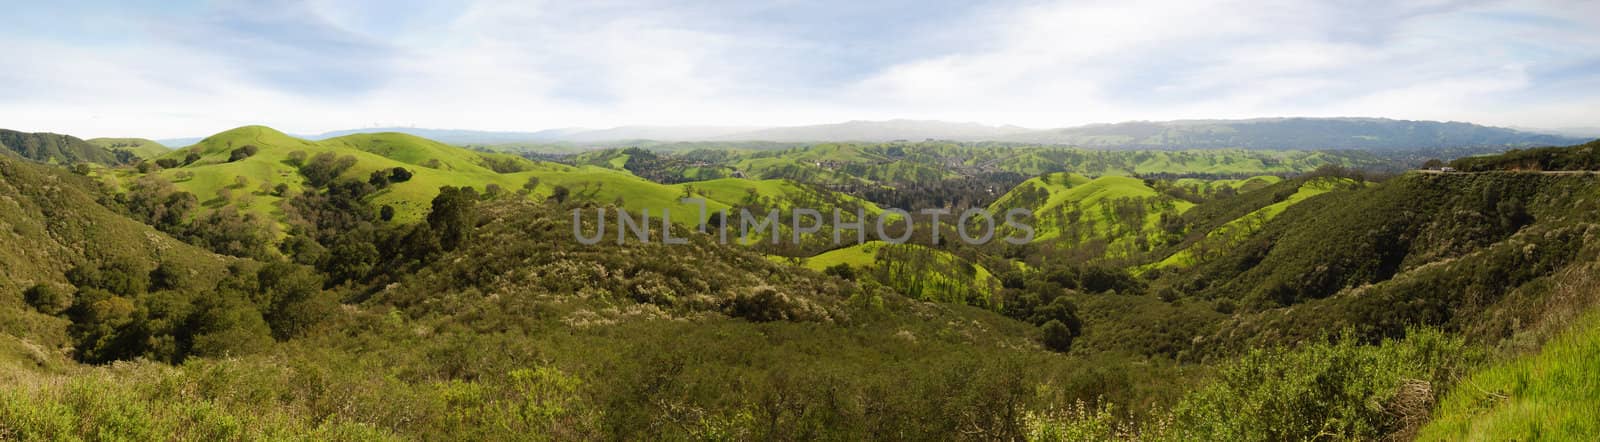 Panoramic view on a sunny day in winter from Mt Diablo state park in California, USA.